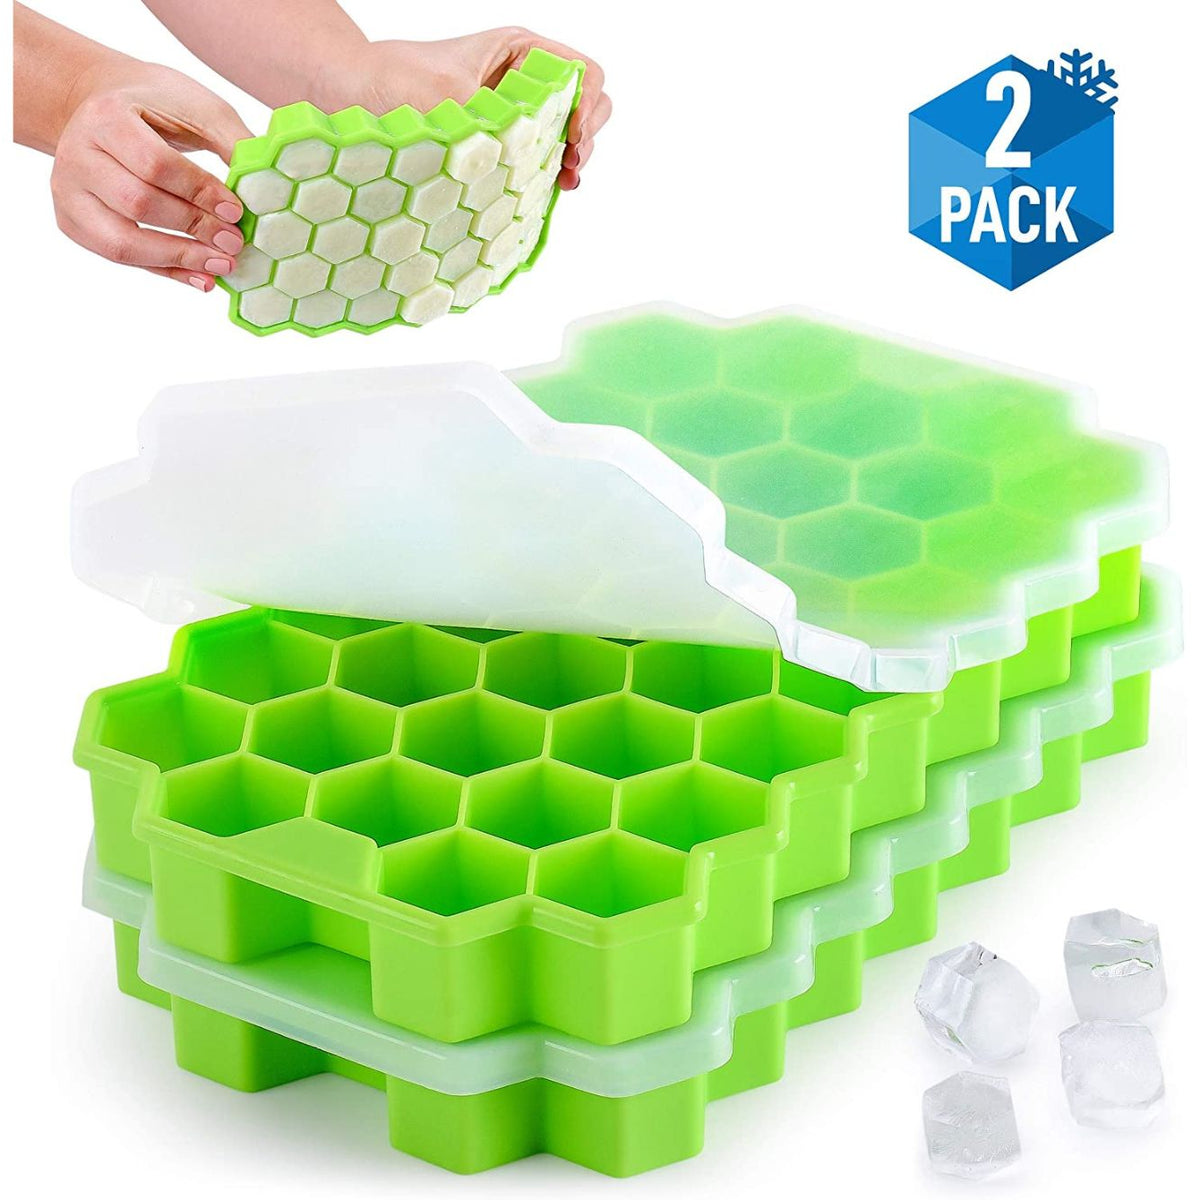 Honeycomb Design Ice Cube Tray w/Cover (Teal) - Handy Gourmet